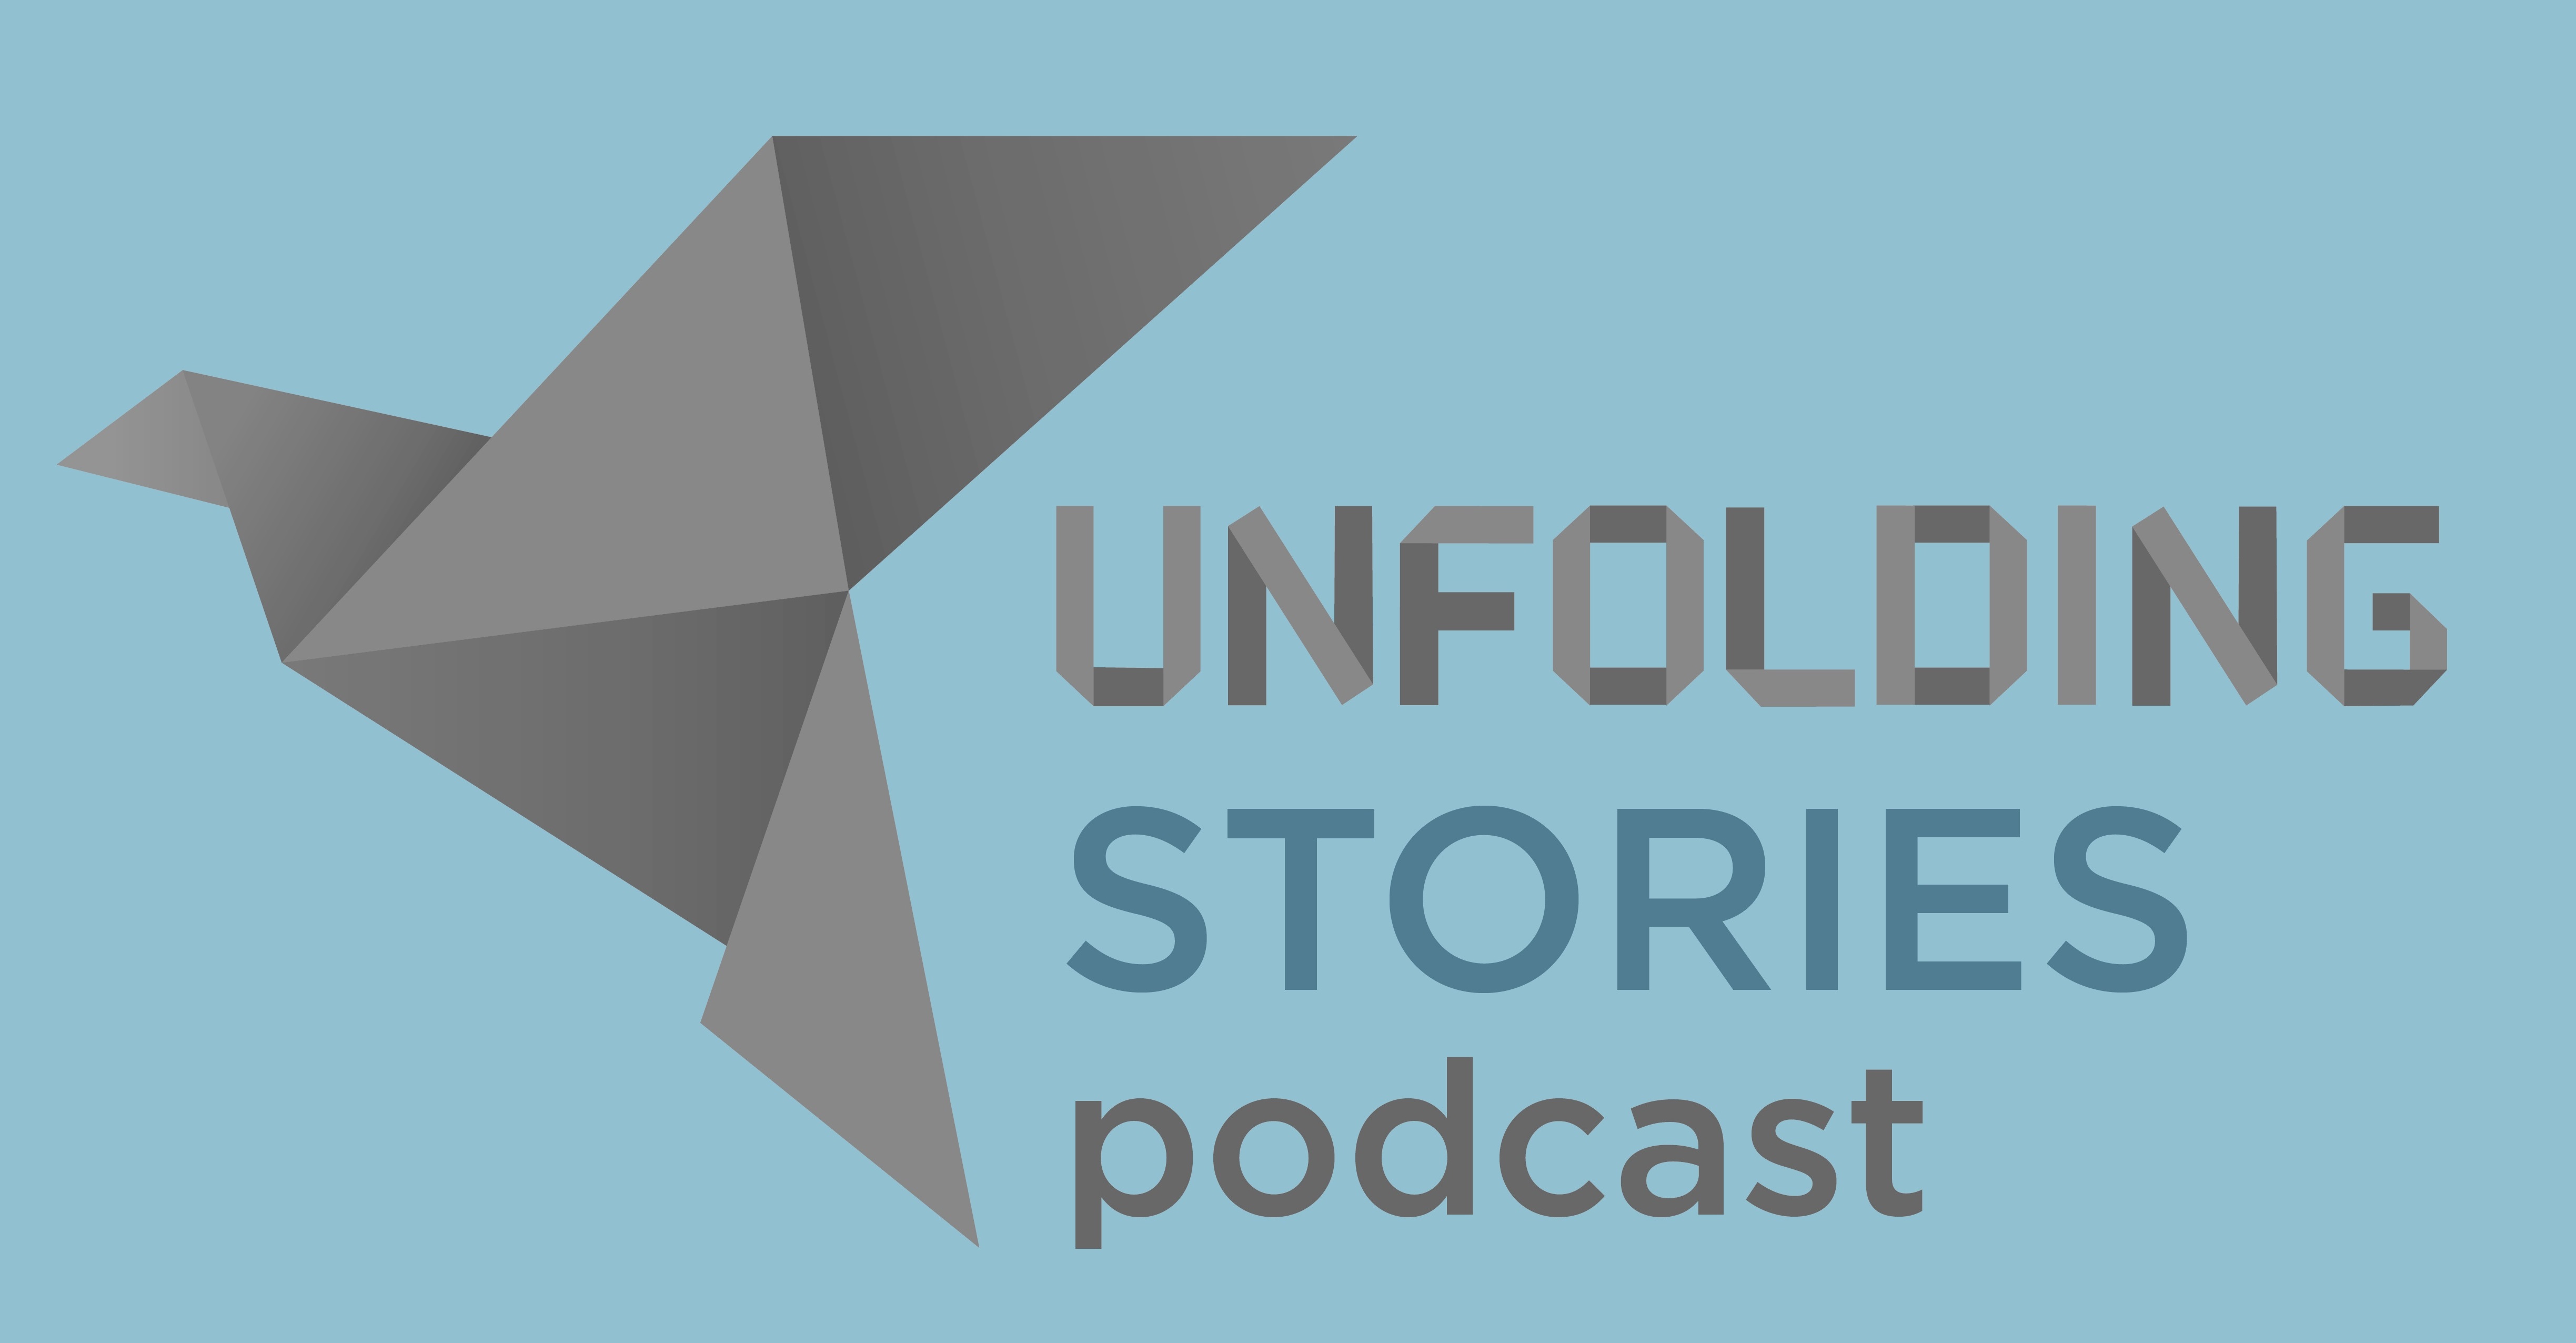 Unfolding Stories Podcast Episode Seven: God’s Provision within the Storm